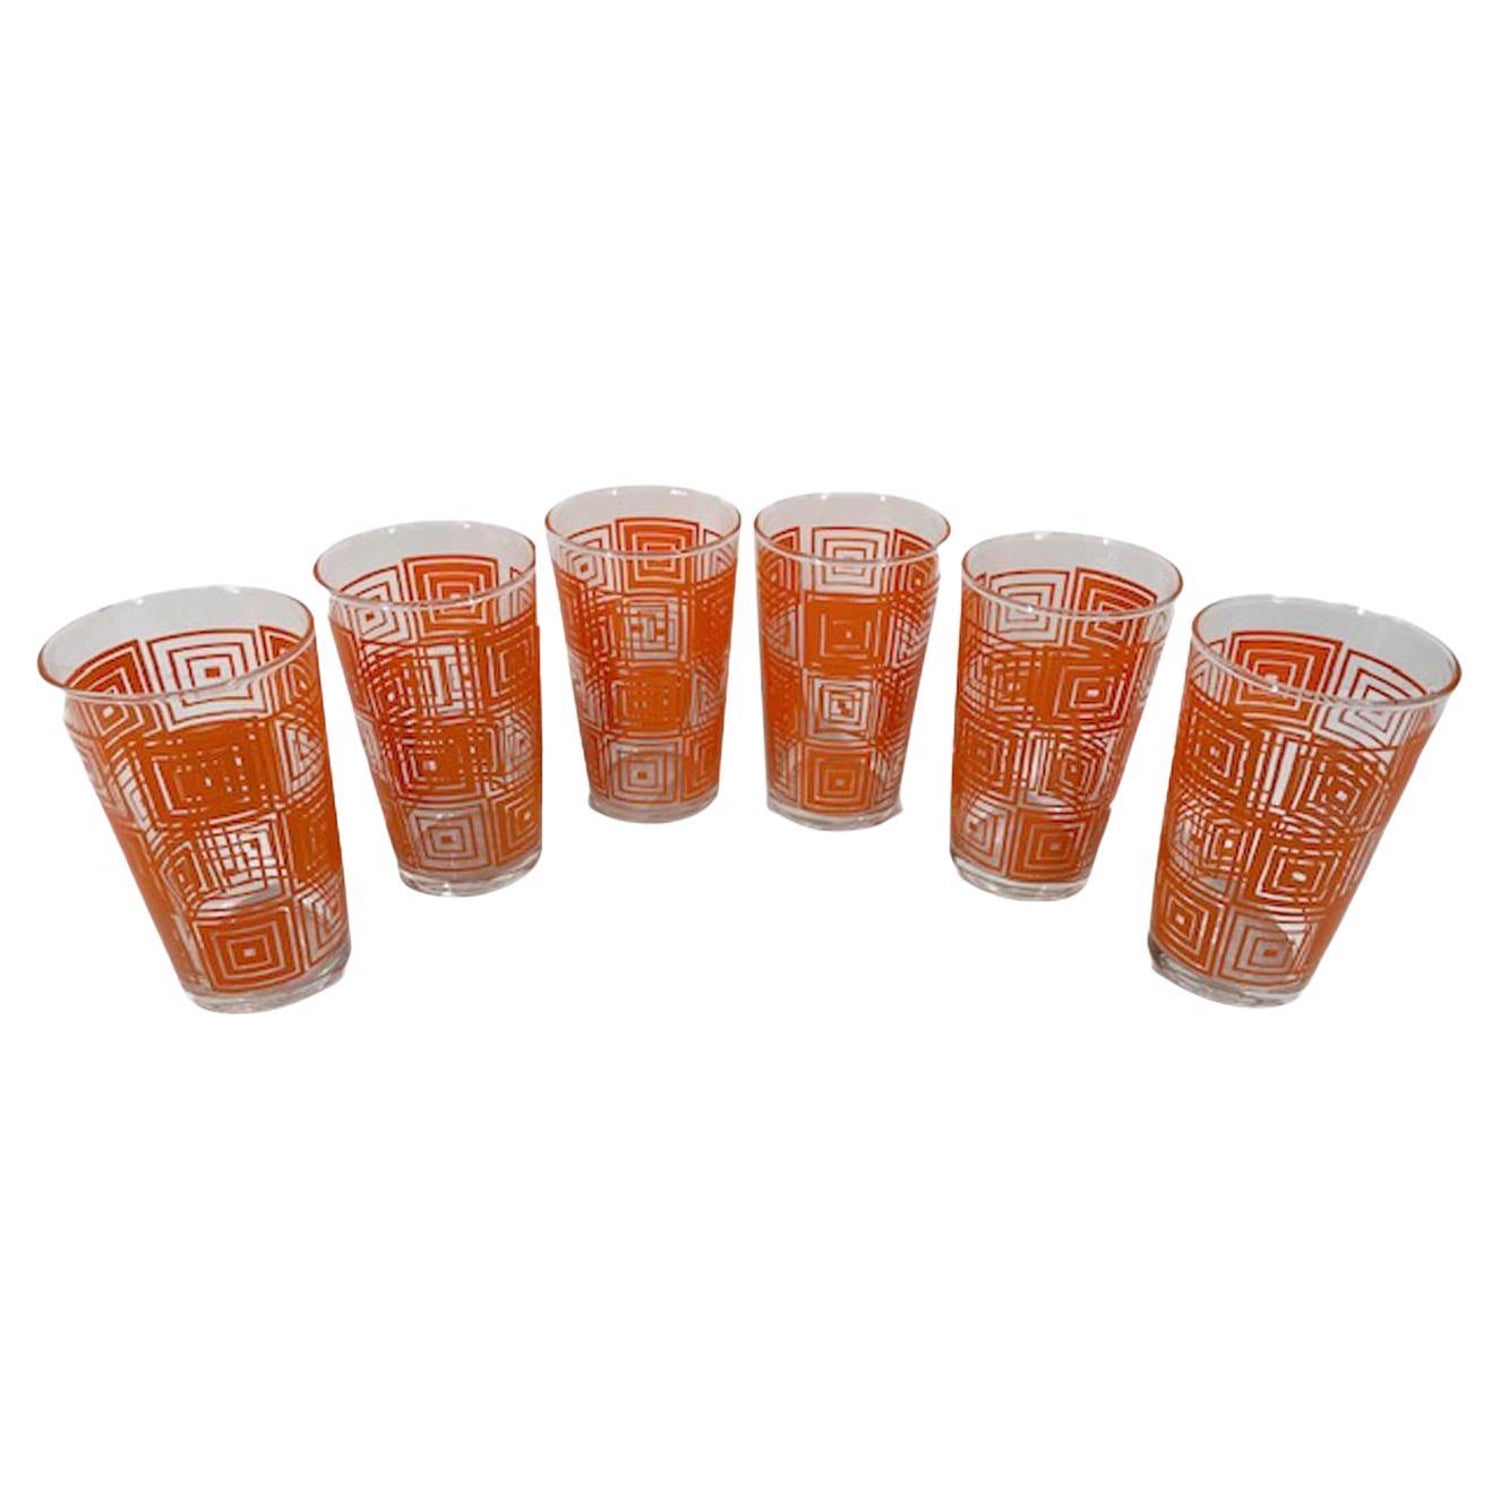 https://a.1stdibscdn.com/six-vintage-federal-glassware-tumblers-with-concentric-squares-in-orange-enamel-for-sale/f_13752/f_299290221660135347665/f_29929022_1660135348056_bg_processed.jpg?width=1500